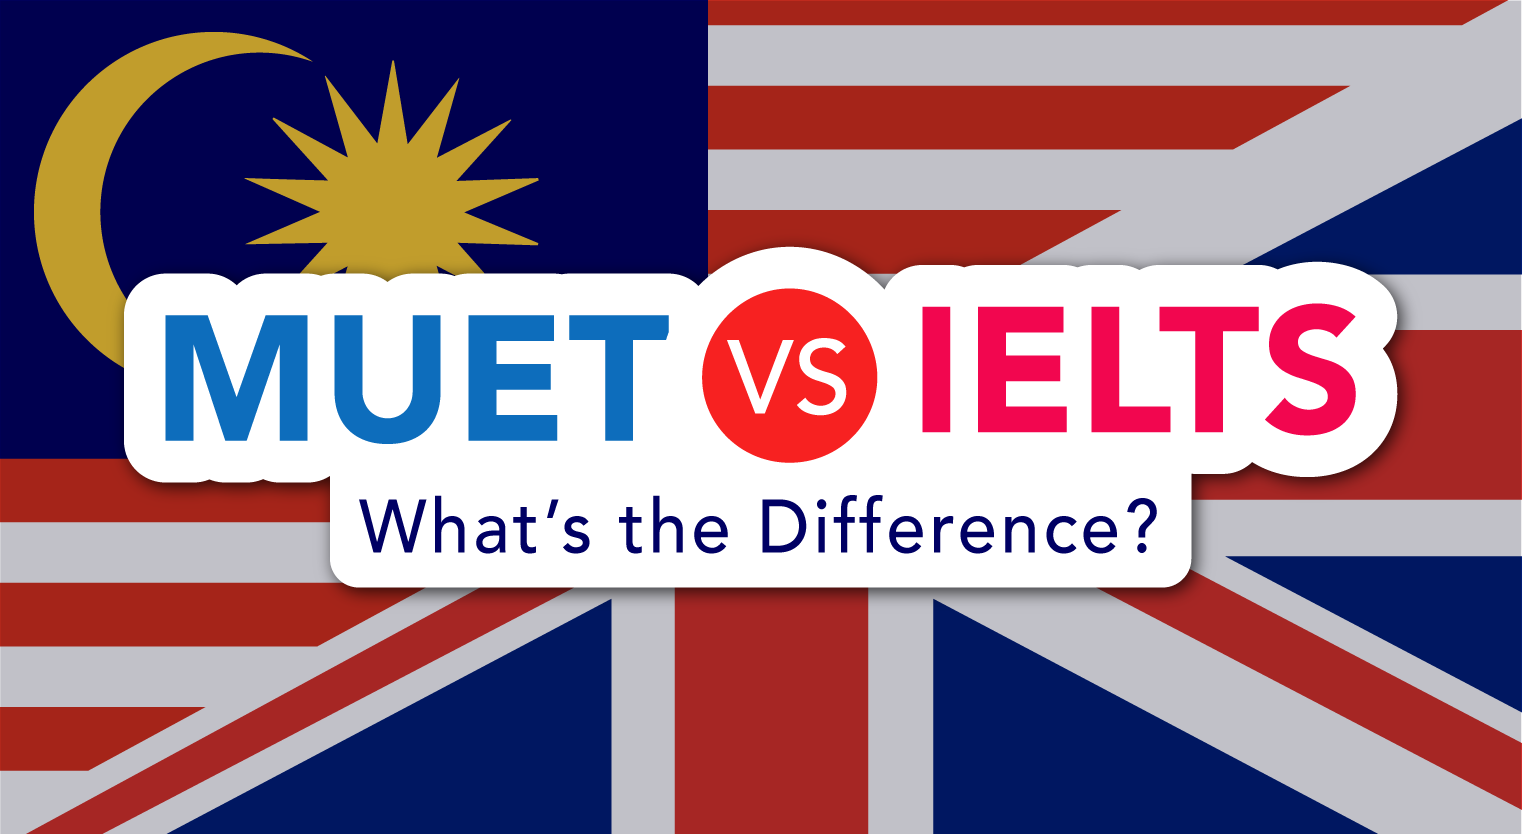 MUET vs IELTS: What's the Difference? - Feature-Image